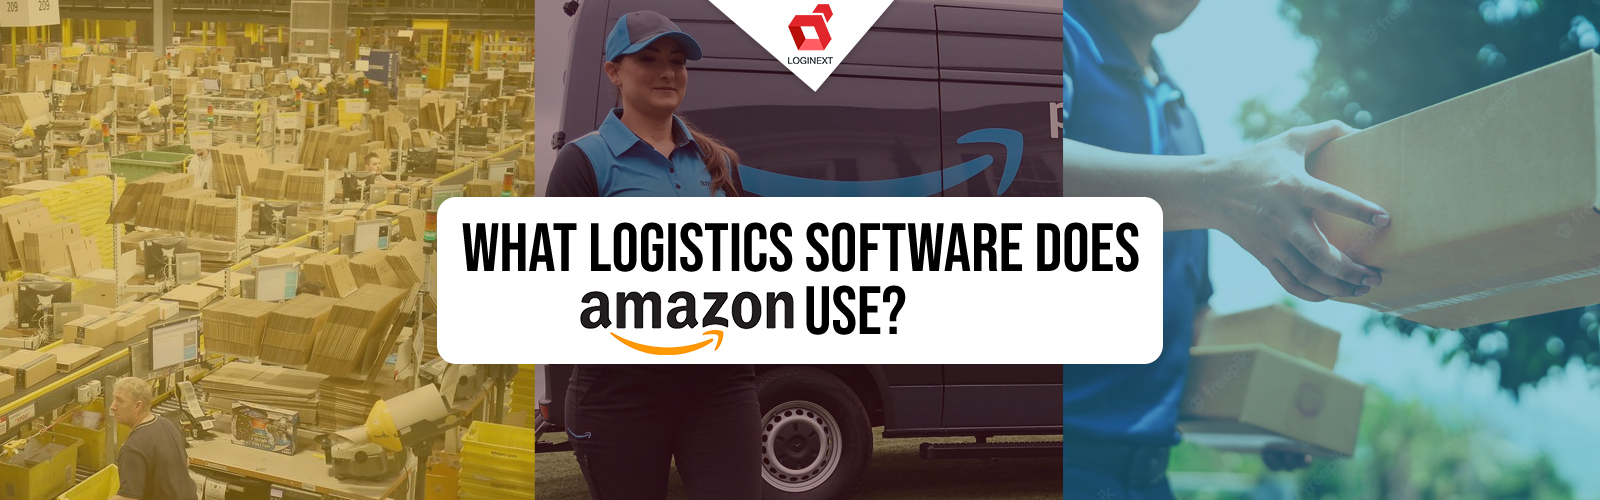 What logistics software does Amazon use?